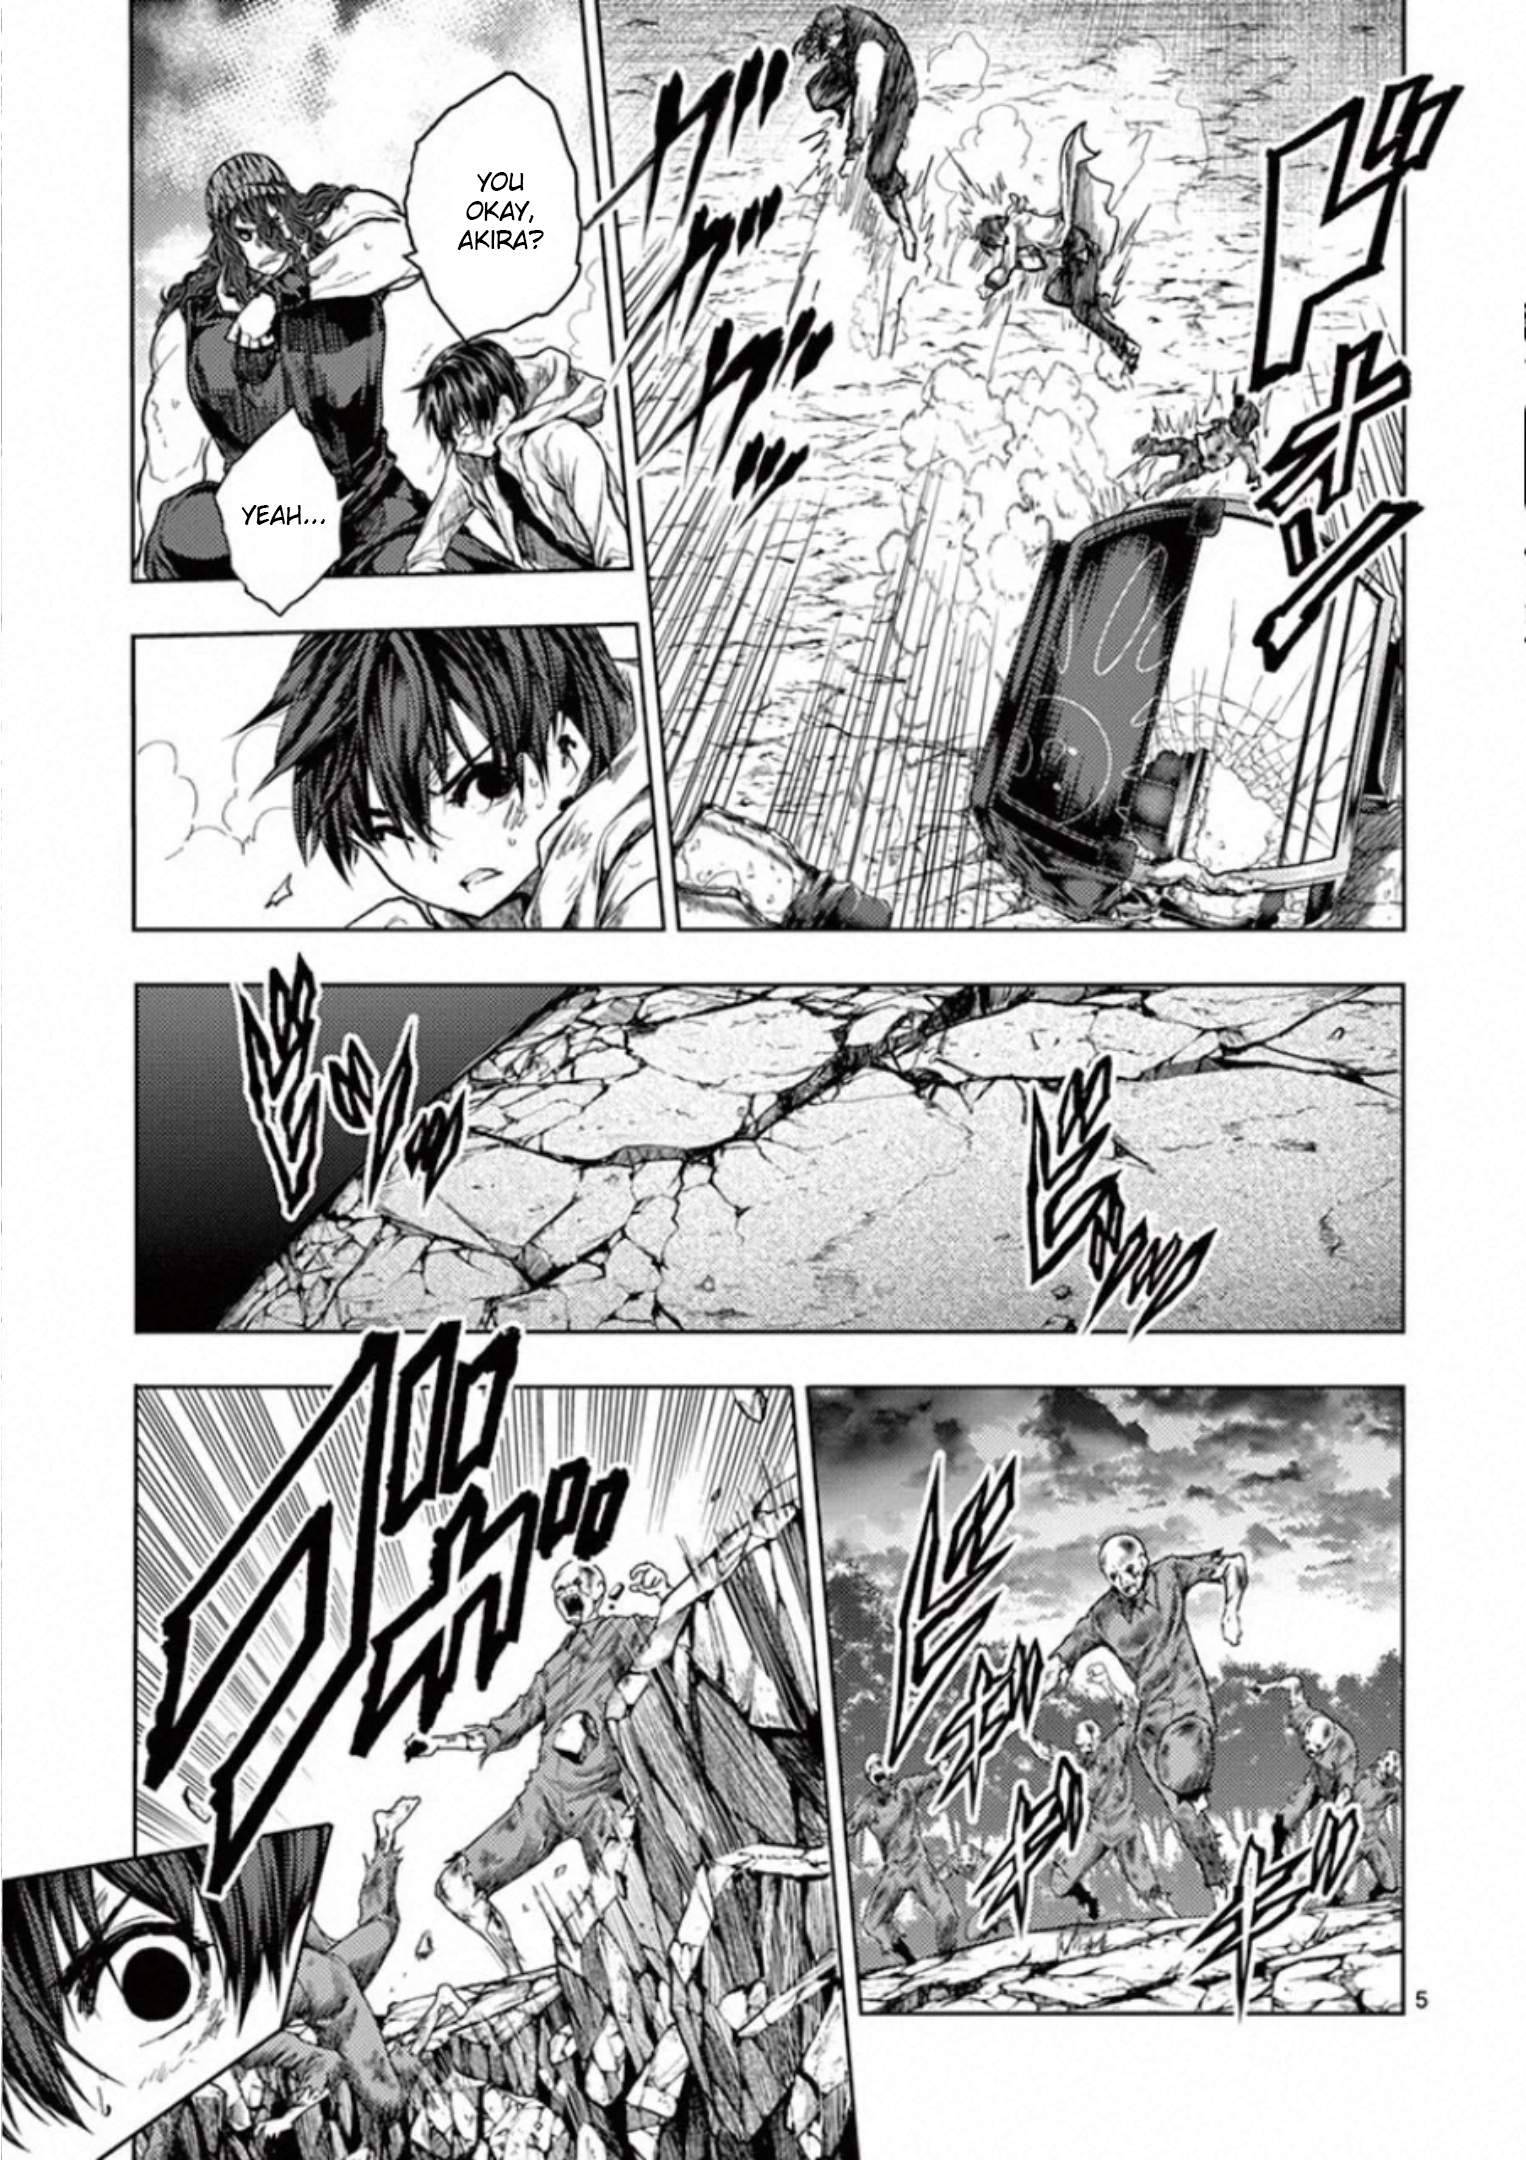 Start Fighting 5 Seconds After Meeting - chapter 137 - #5